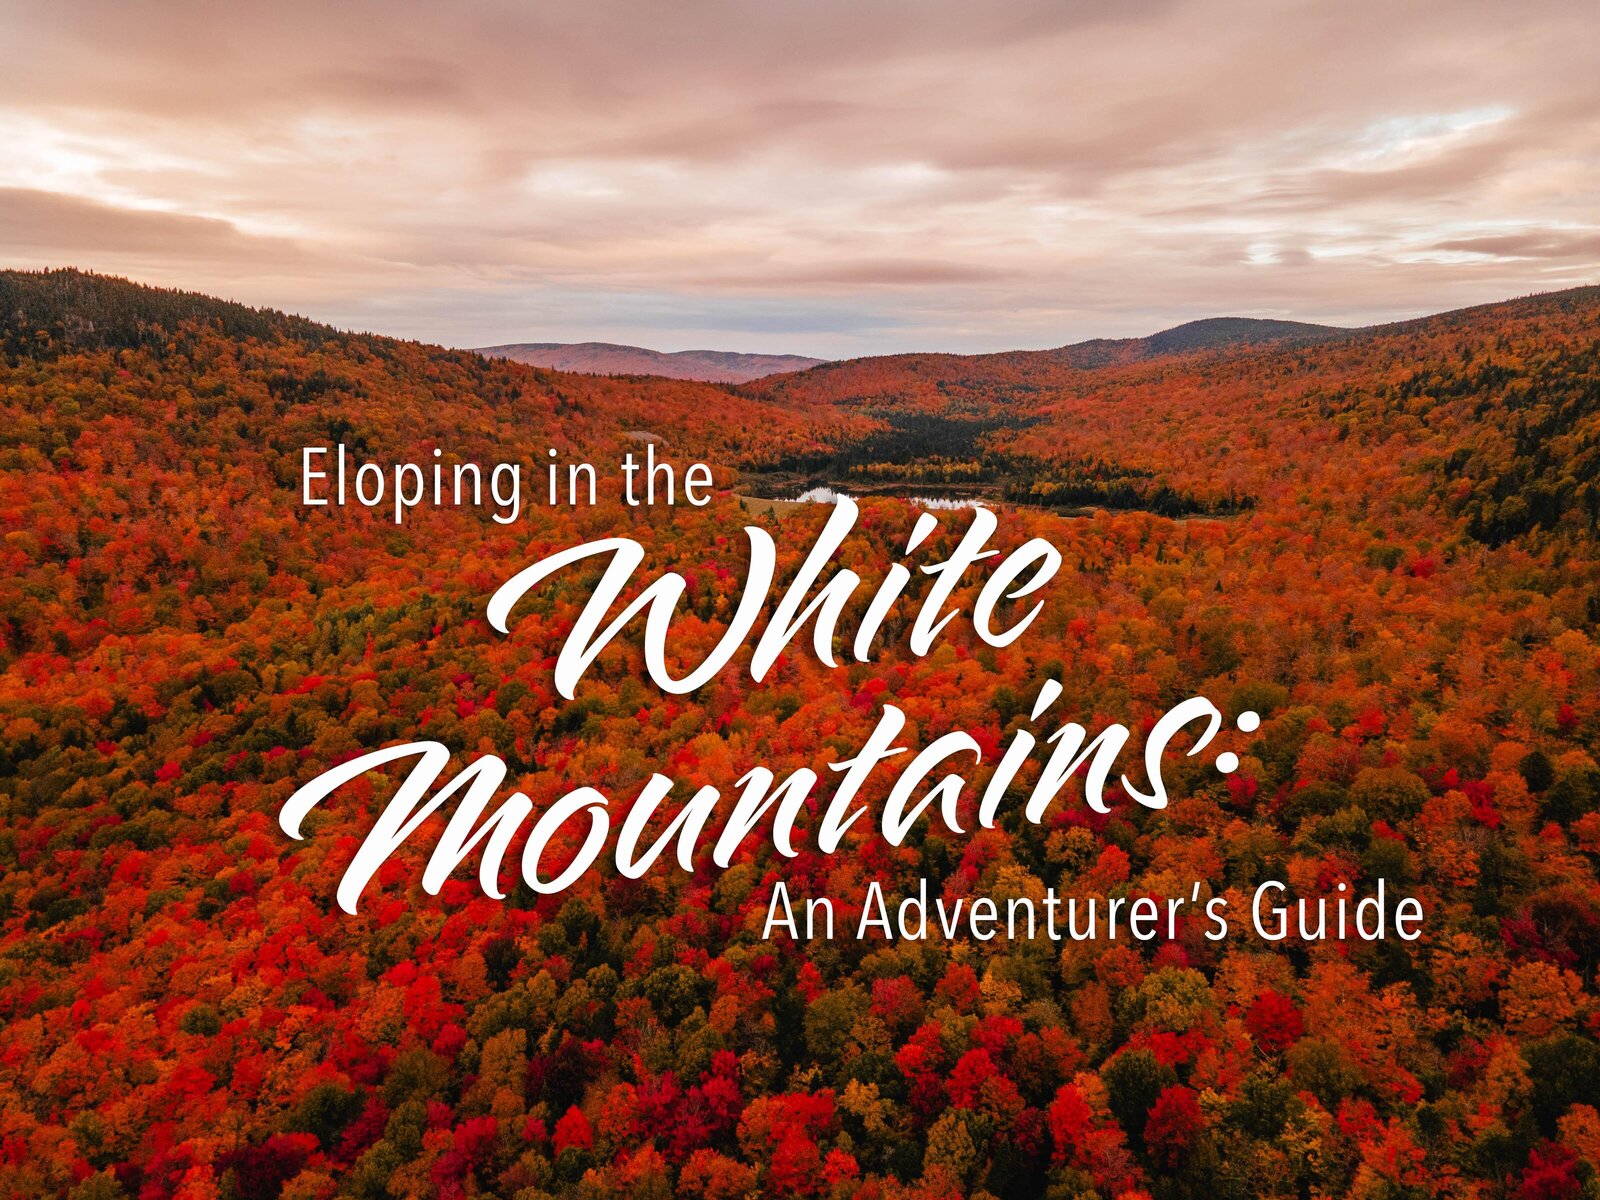 How to Elope in the White Mountains